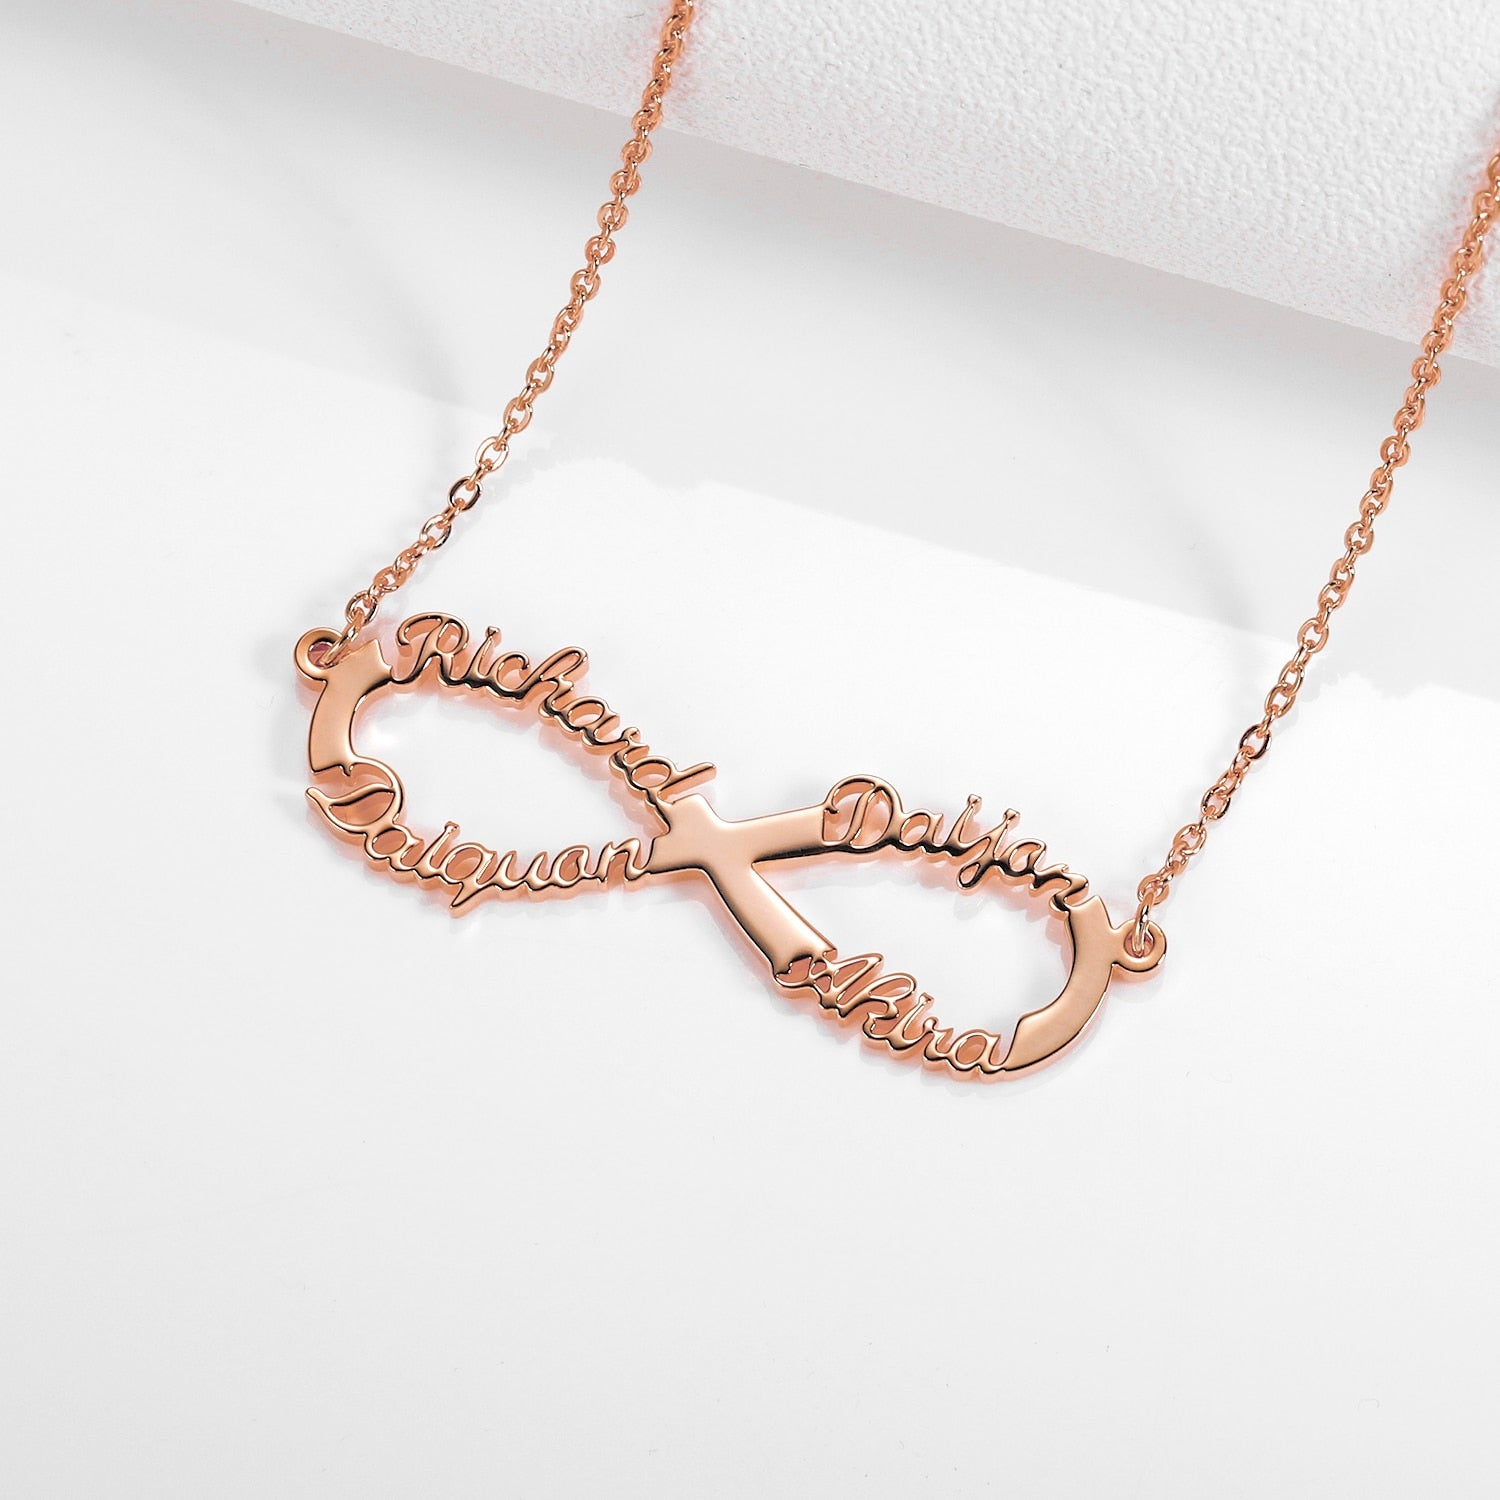 Personalized Infinity Necklace - Limitless Jewellery